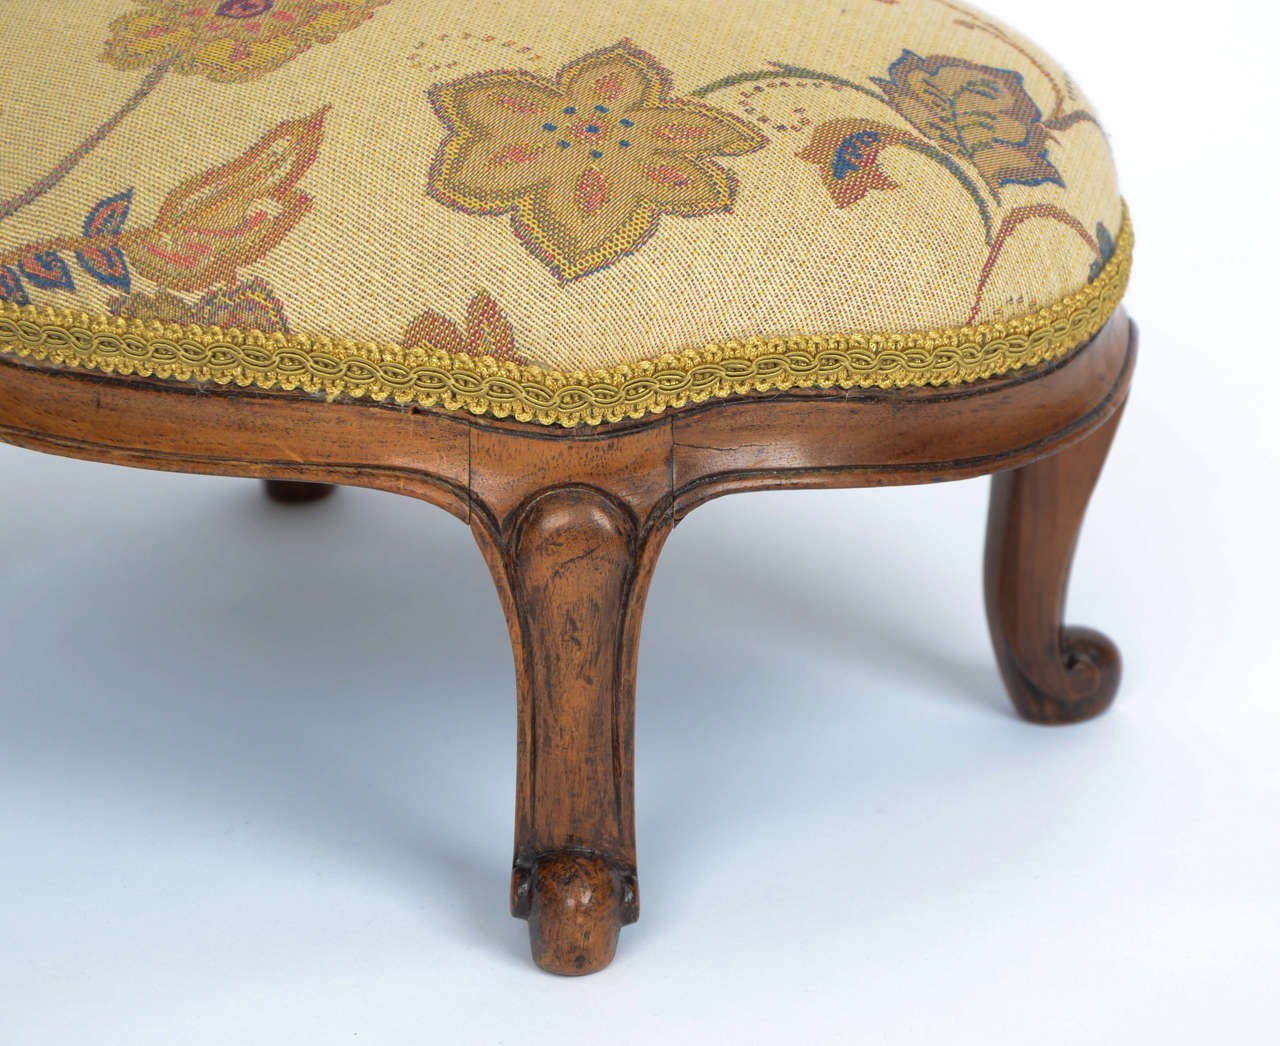 Hand-Crafted Mid 19th C. Victorian, FOOT STOOL, Walnut, English